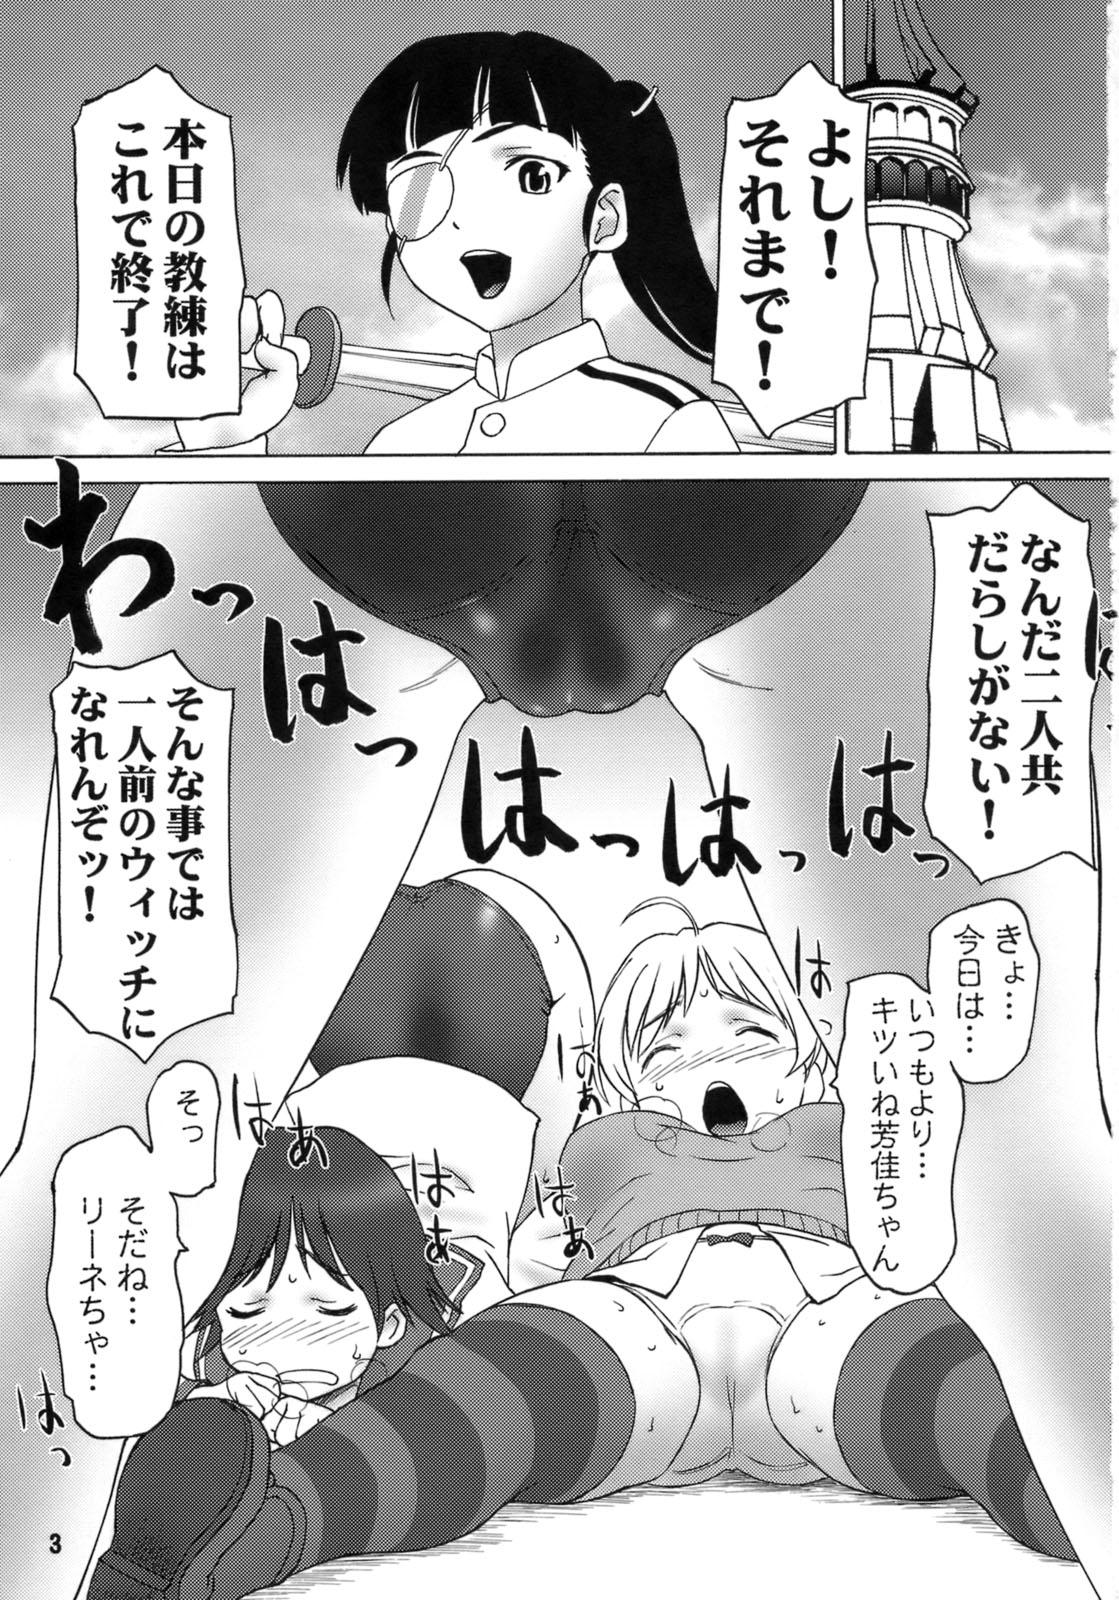 Assfucked Steady - Strike witches Vergon - Page 2